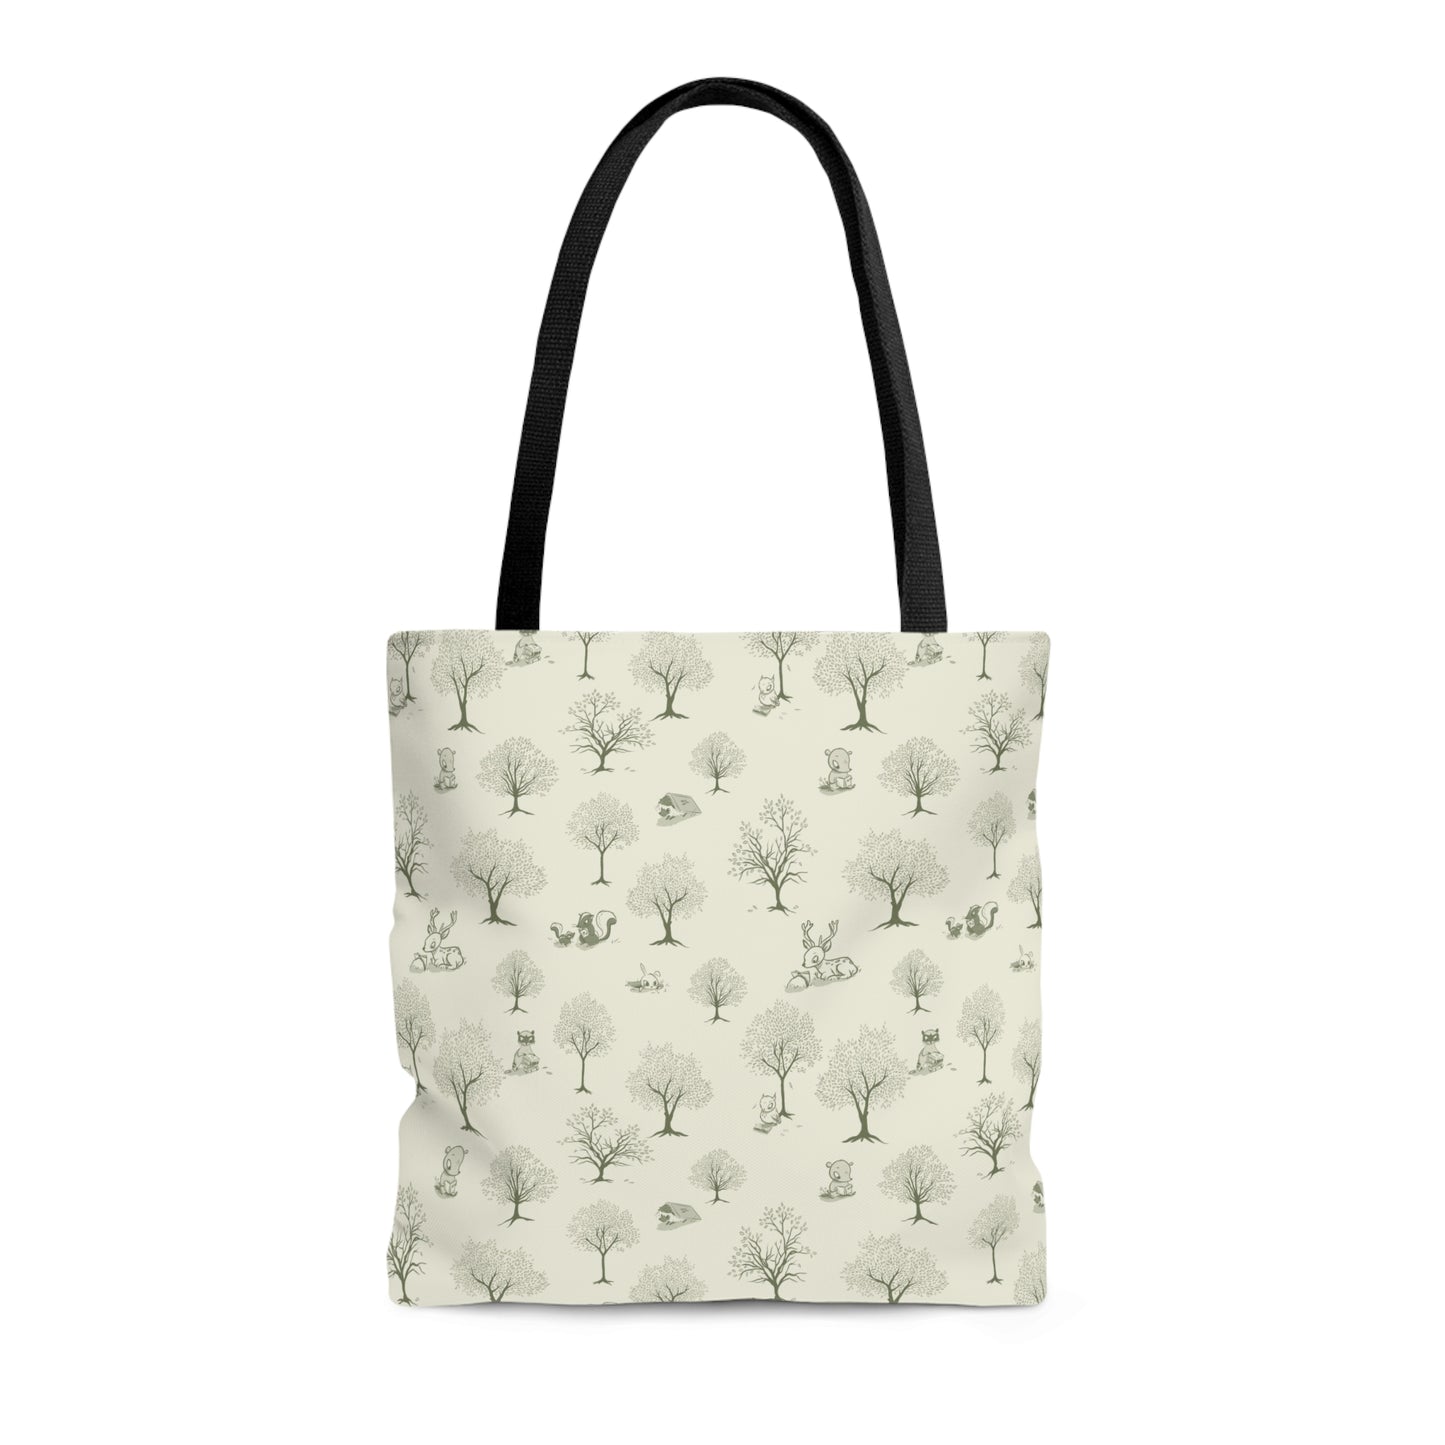 Story Time Tote Bag